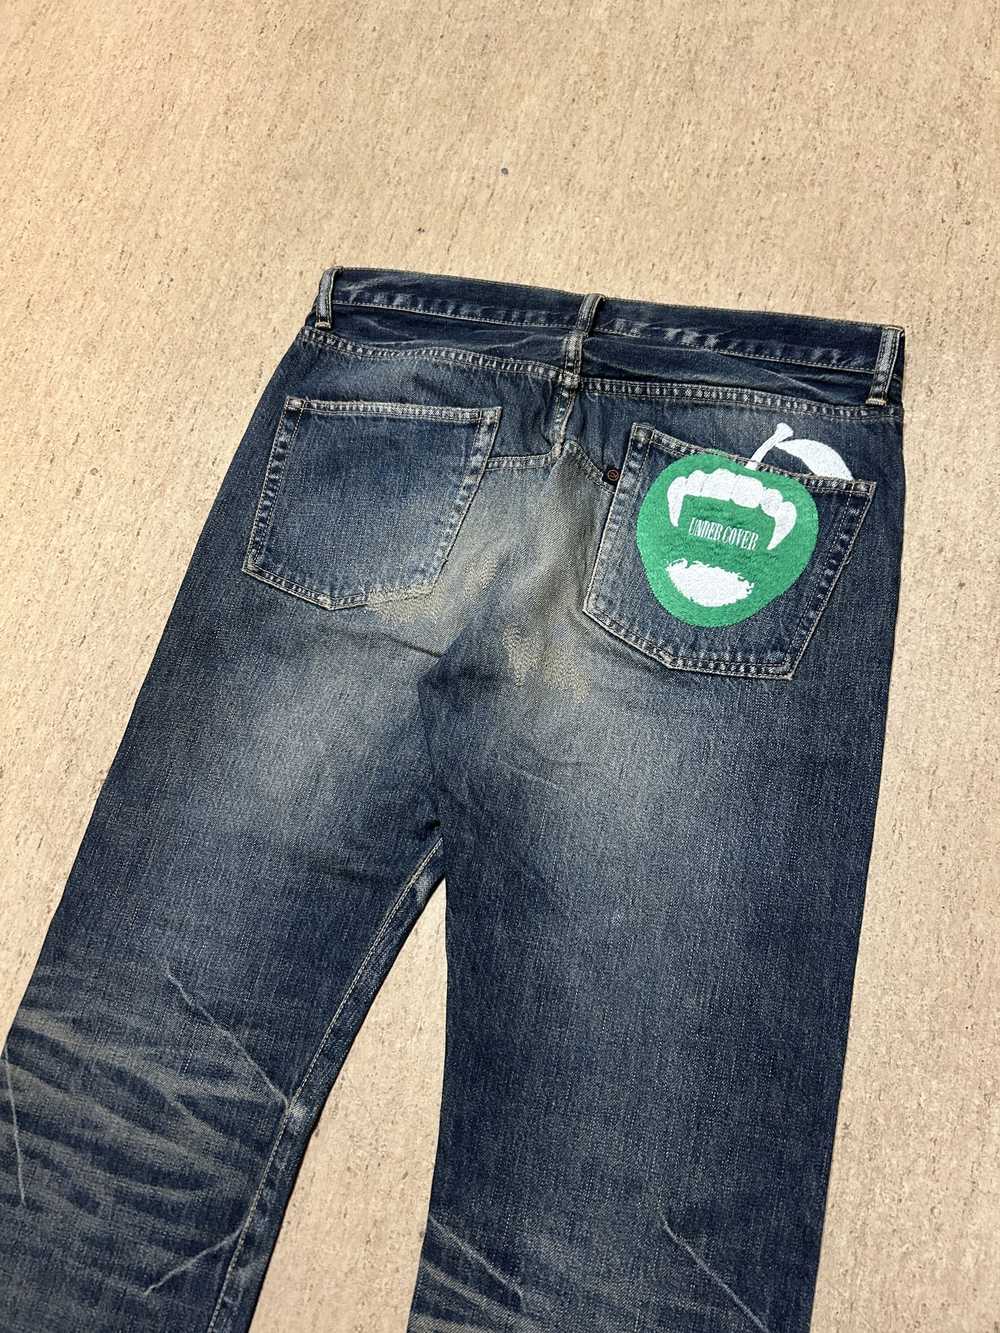 Undercover *SOLD* Undercover aw07 Apple Fang Denim - image 2